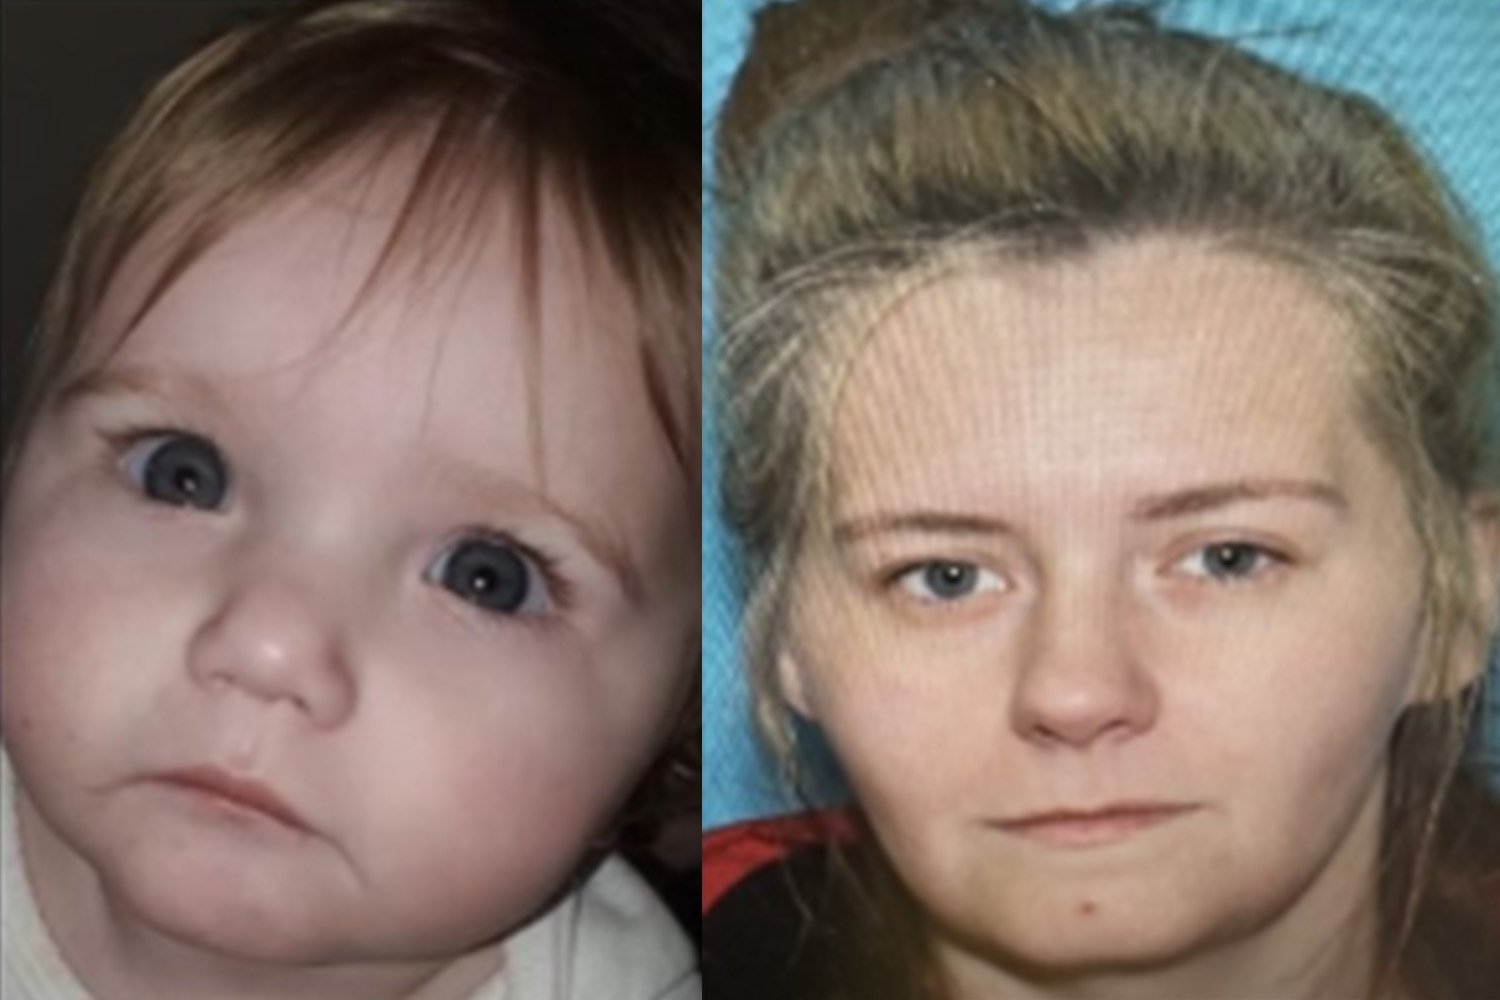 Authorities Searching for One-Year-Old Child Reported Missing From Punxsutawney